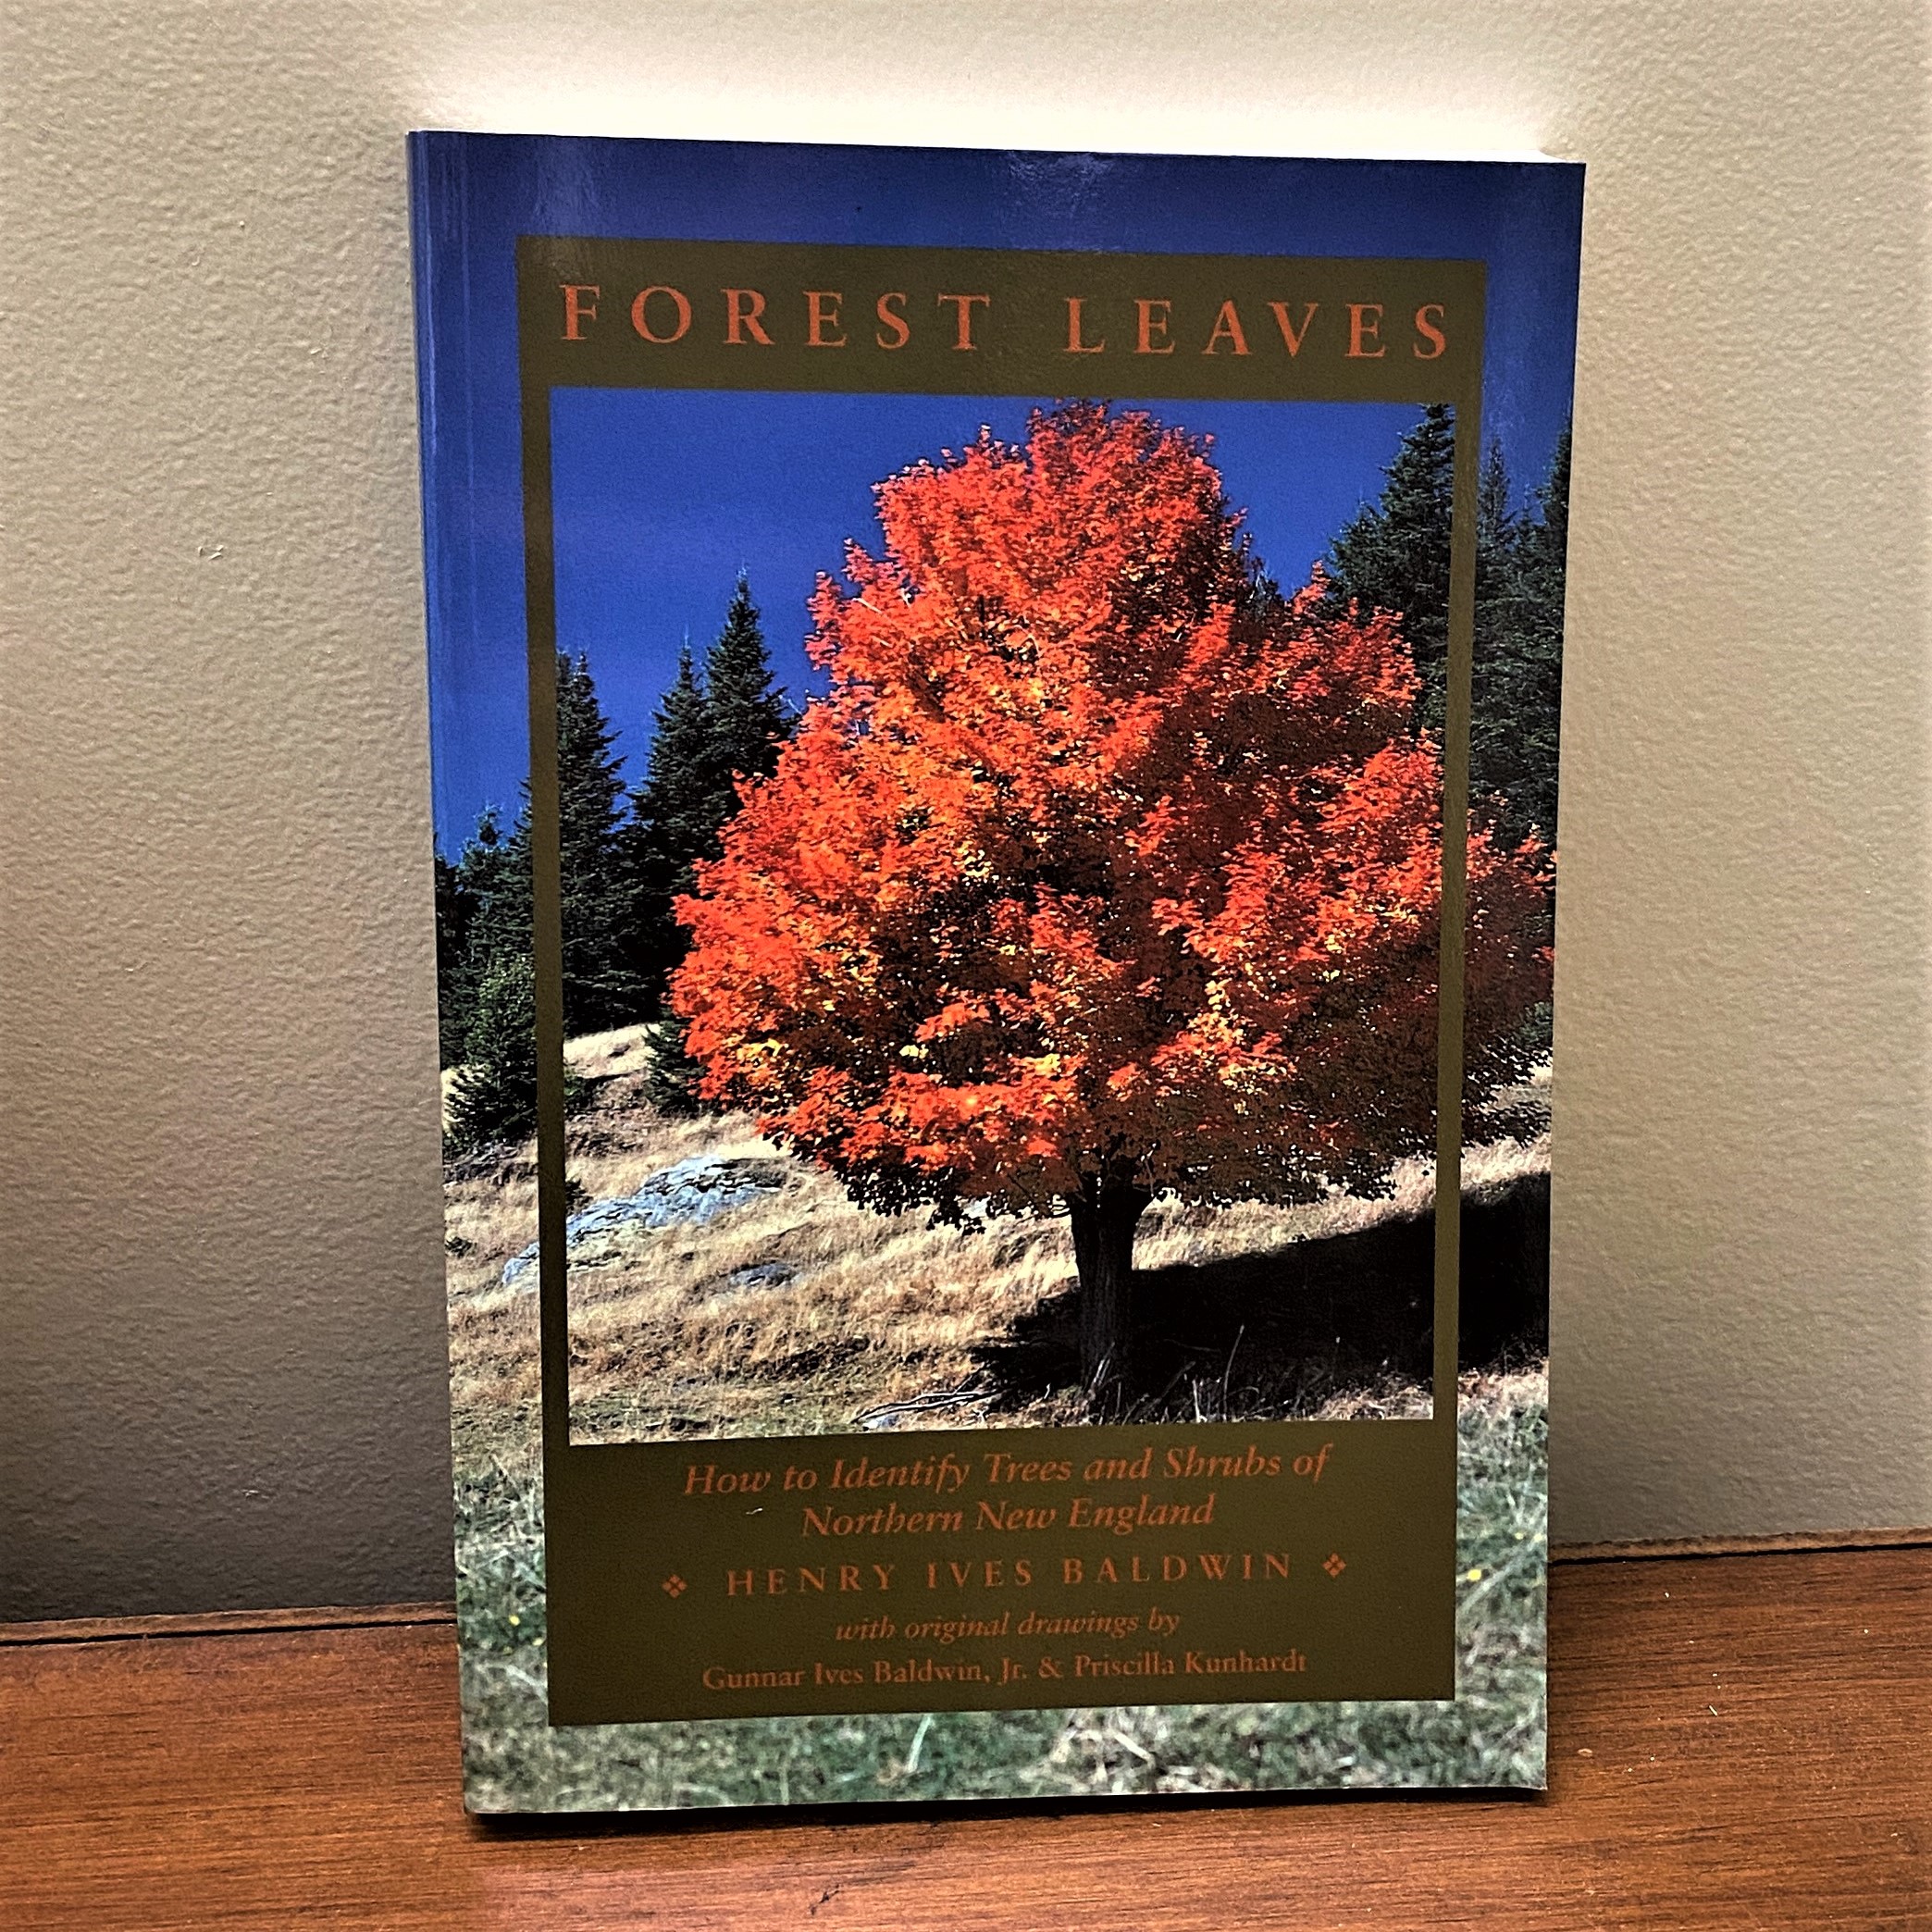 The cover of Forest Leaves shows a bright orange tree.